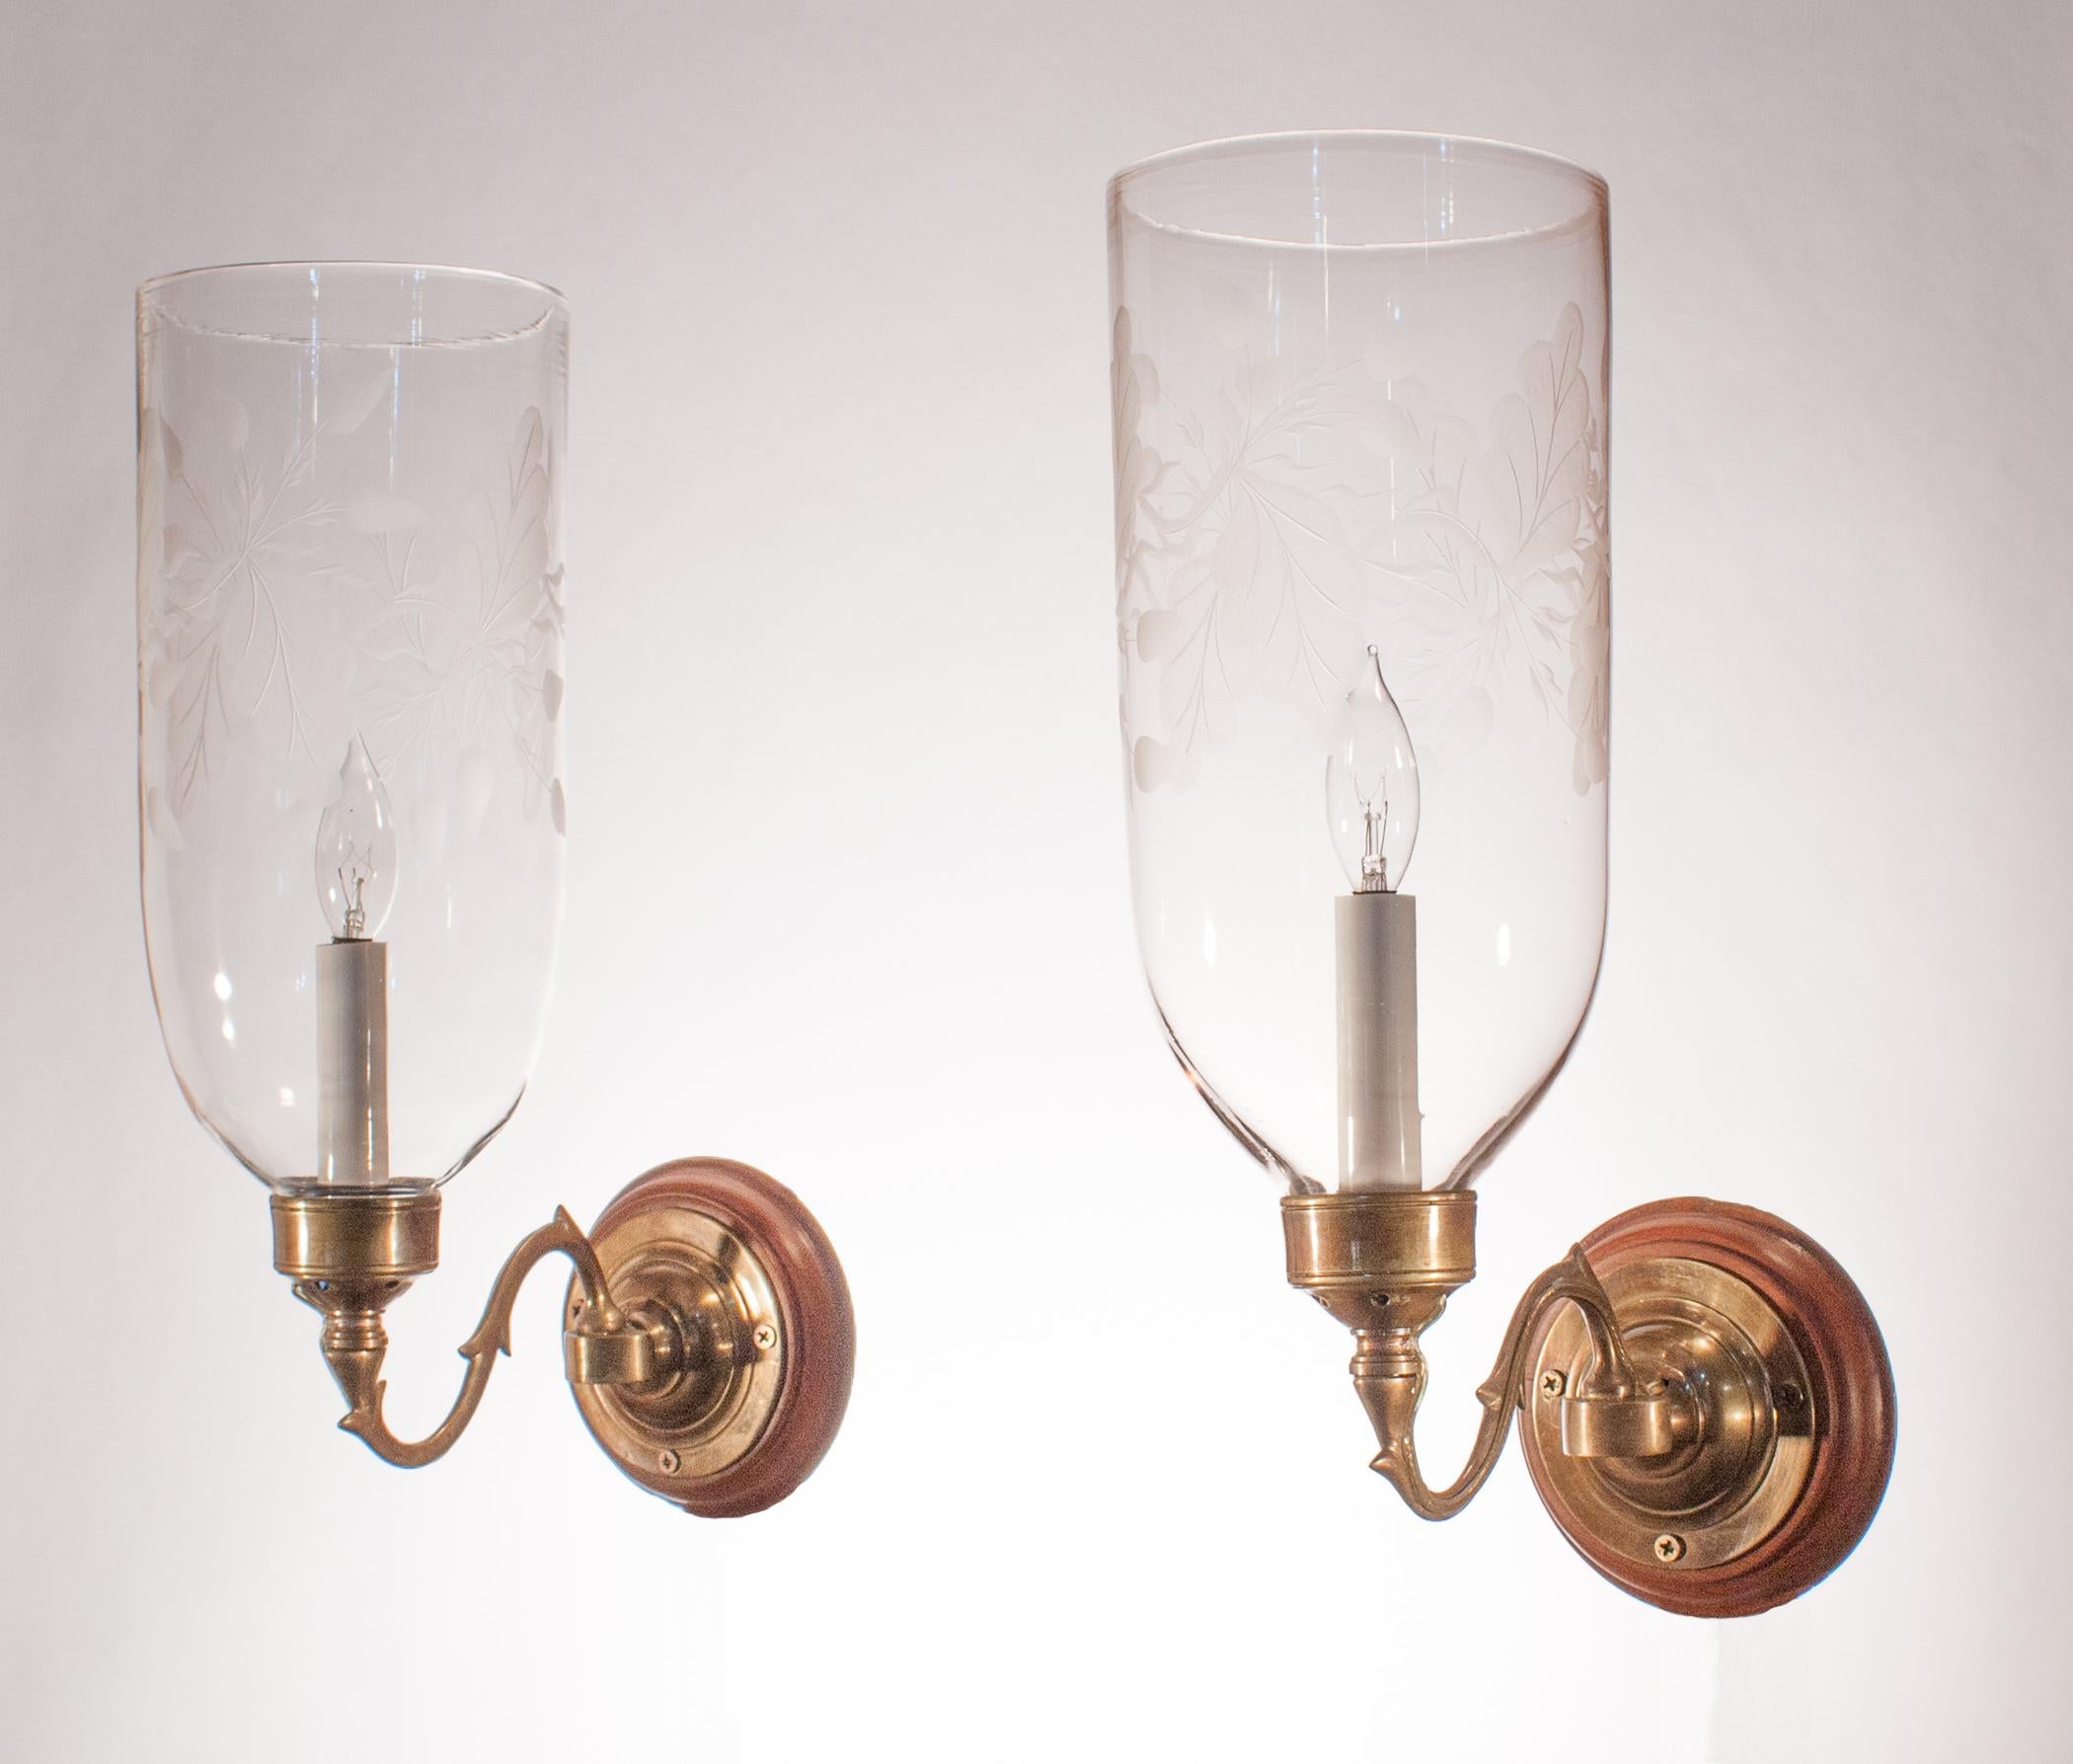 A beautiful pair of late 19th century hurricane shades with straight form and a tasteful frosted leaf motif. The quality of the handblown glass is excellent, with some subtle swirling in the glass. Originally for candles, the wall sconces have been